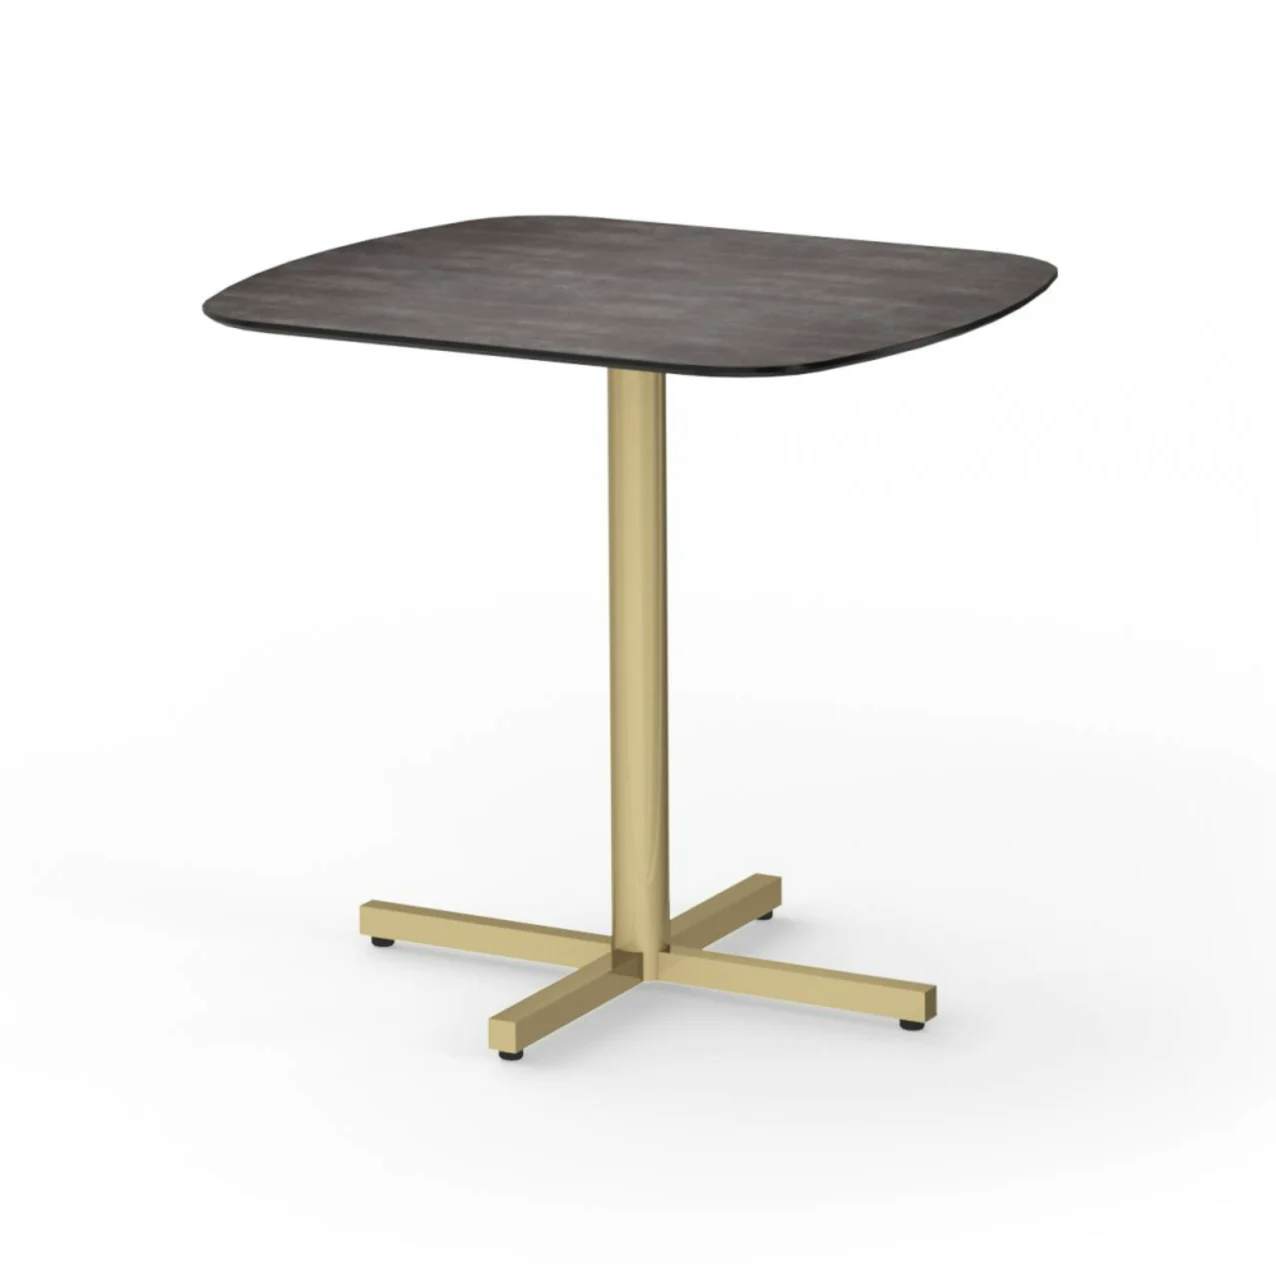 MAMAGREEN Zupy 30" Bistro Table | Frame: Galvanized Steel, Neo Brass | Tabletop: HPL, Laterite